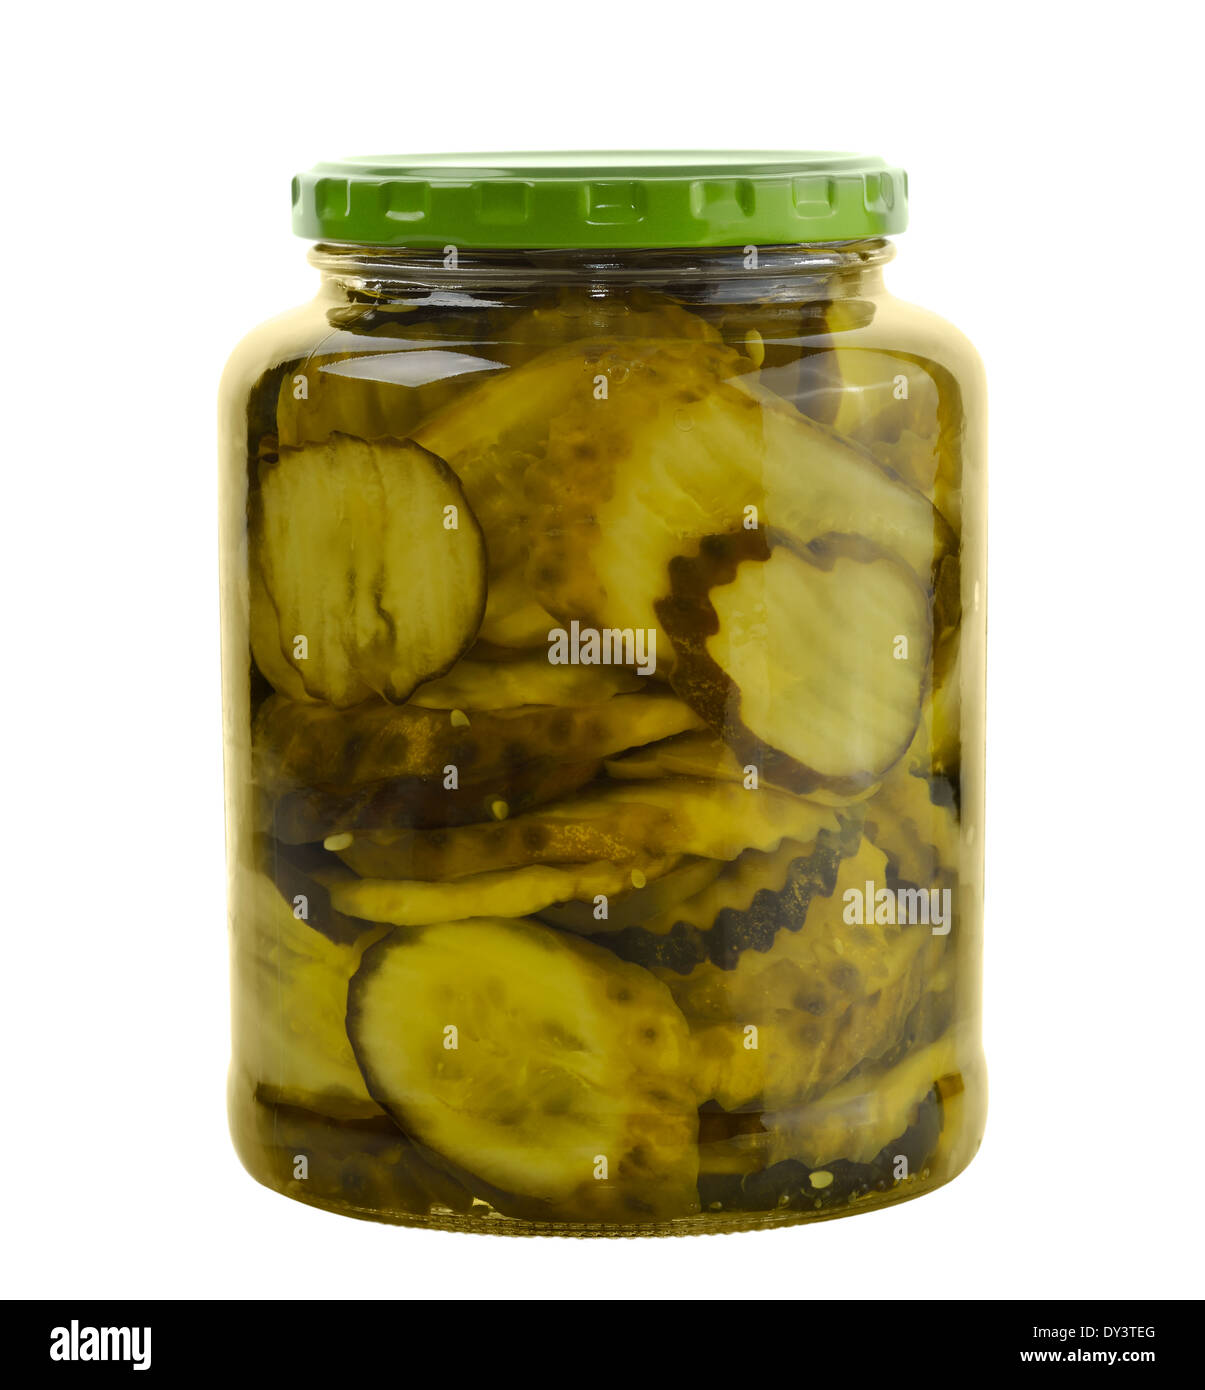 Jar Of Pickles Isolated On White Background Stock Photo